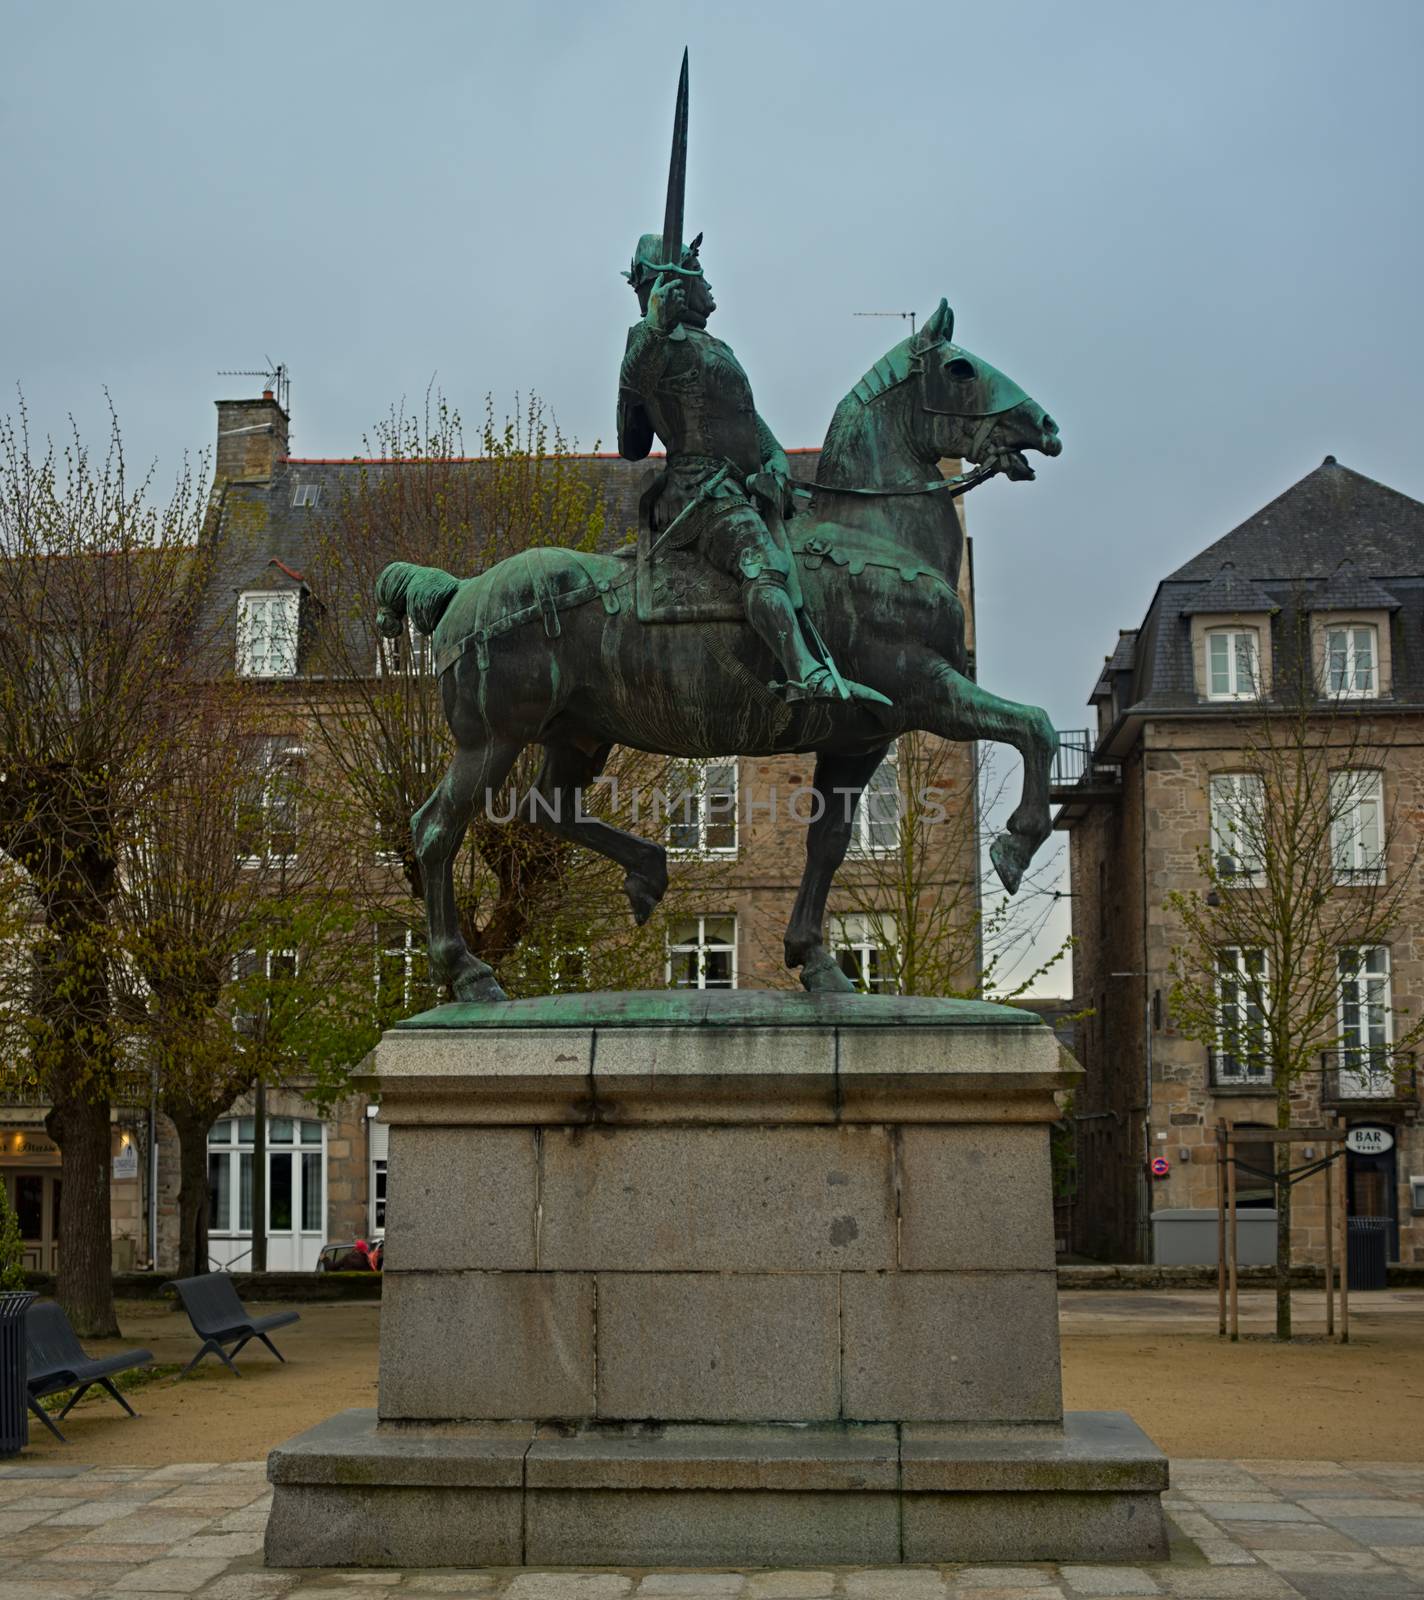 Horse rider on pedestal with sword